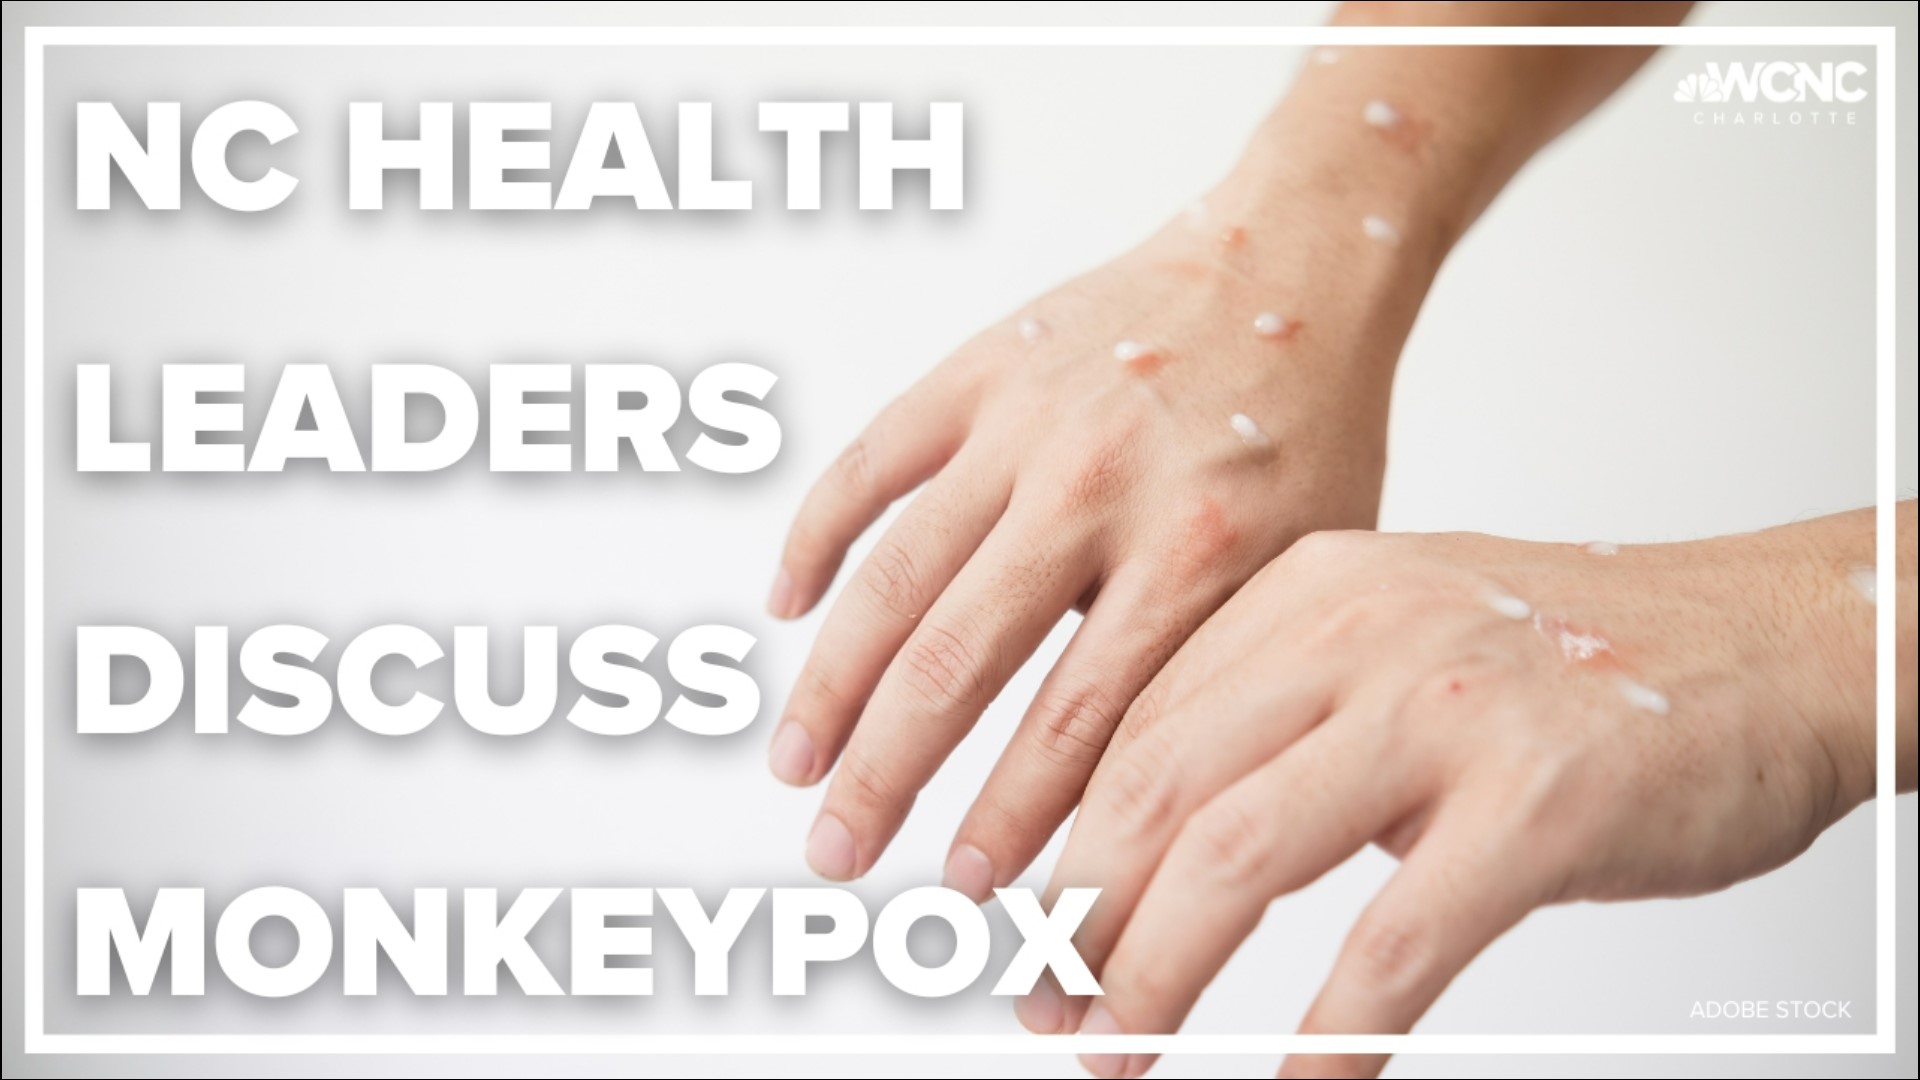 Health leaders calling on the community to help get the monkeypox outbreak under control.